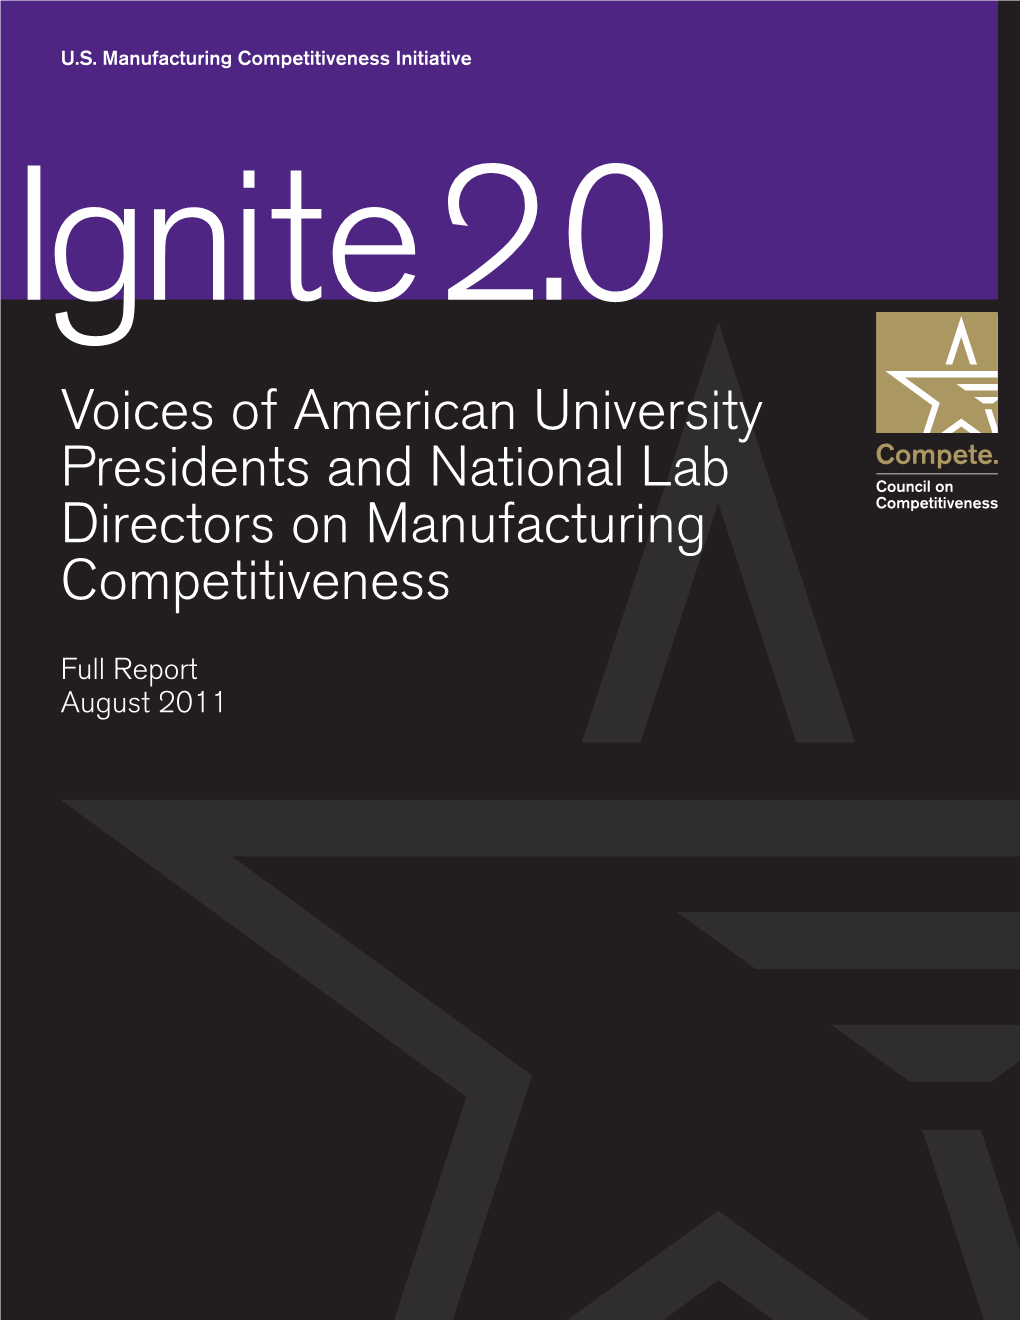 Voices of American University Presidents and National Lab Directors on Manufacturing Competitiveness